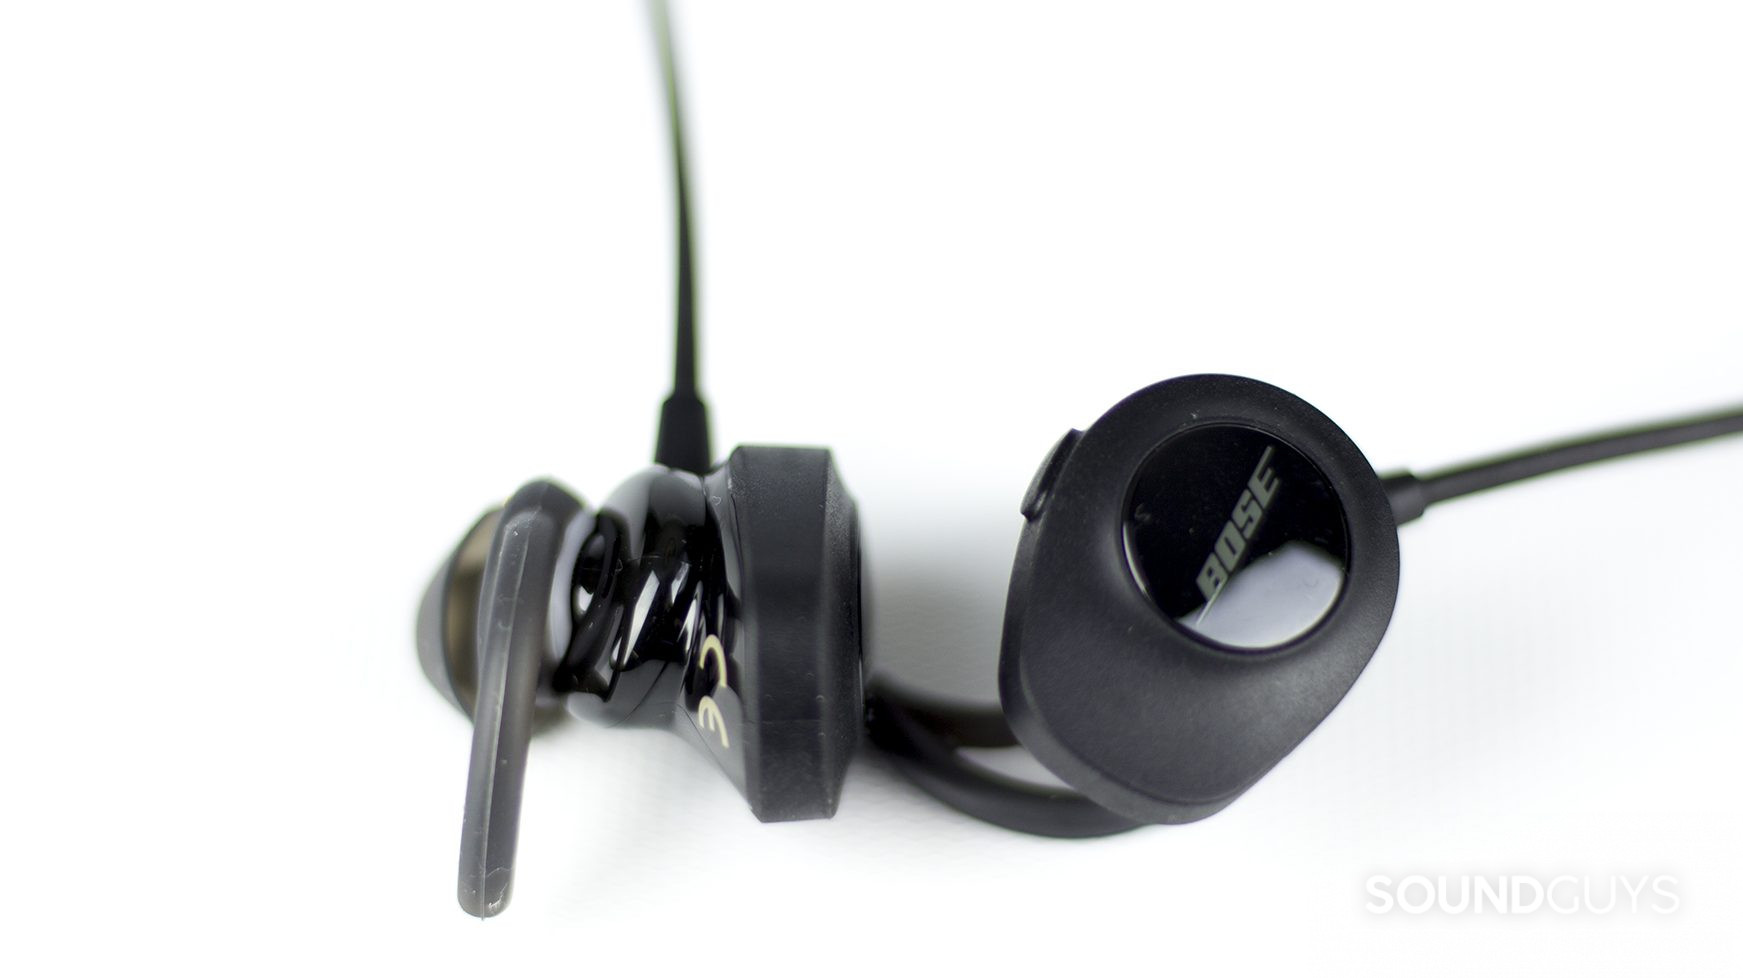 The Bose SoundSport Wireless earbuds in black with the buds and tips in view.